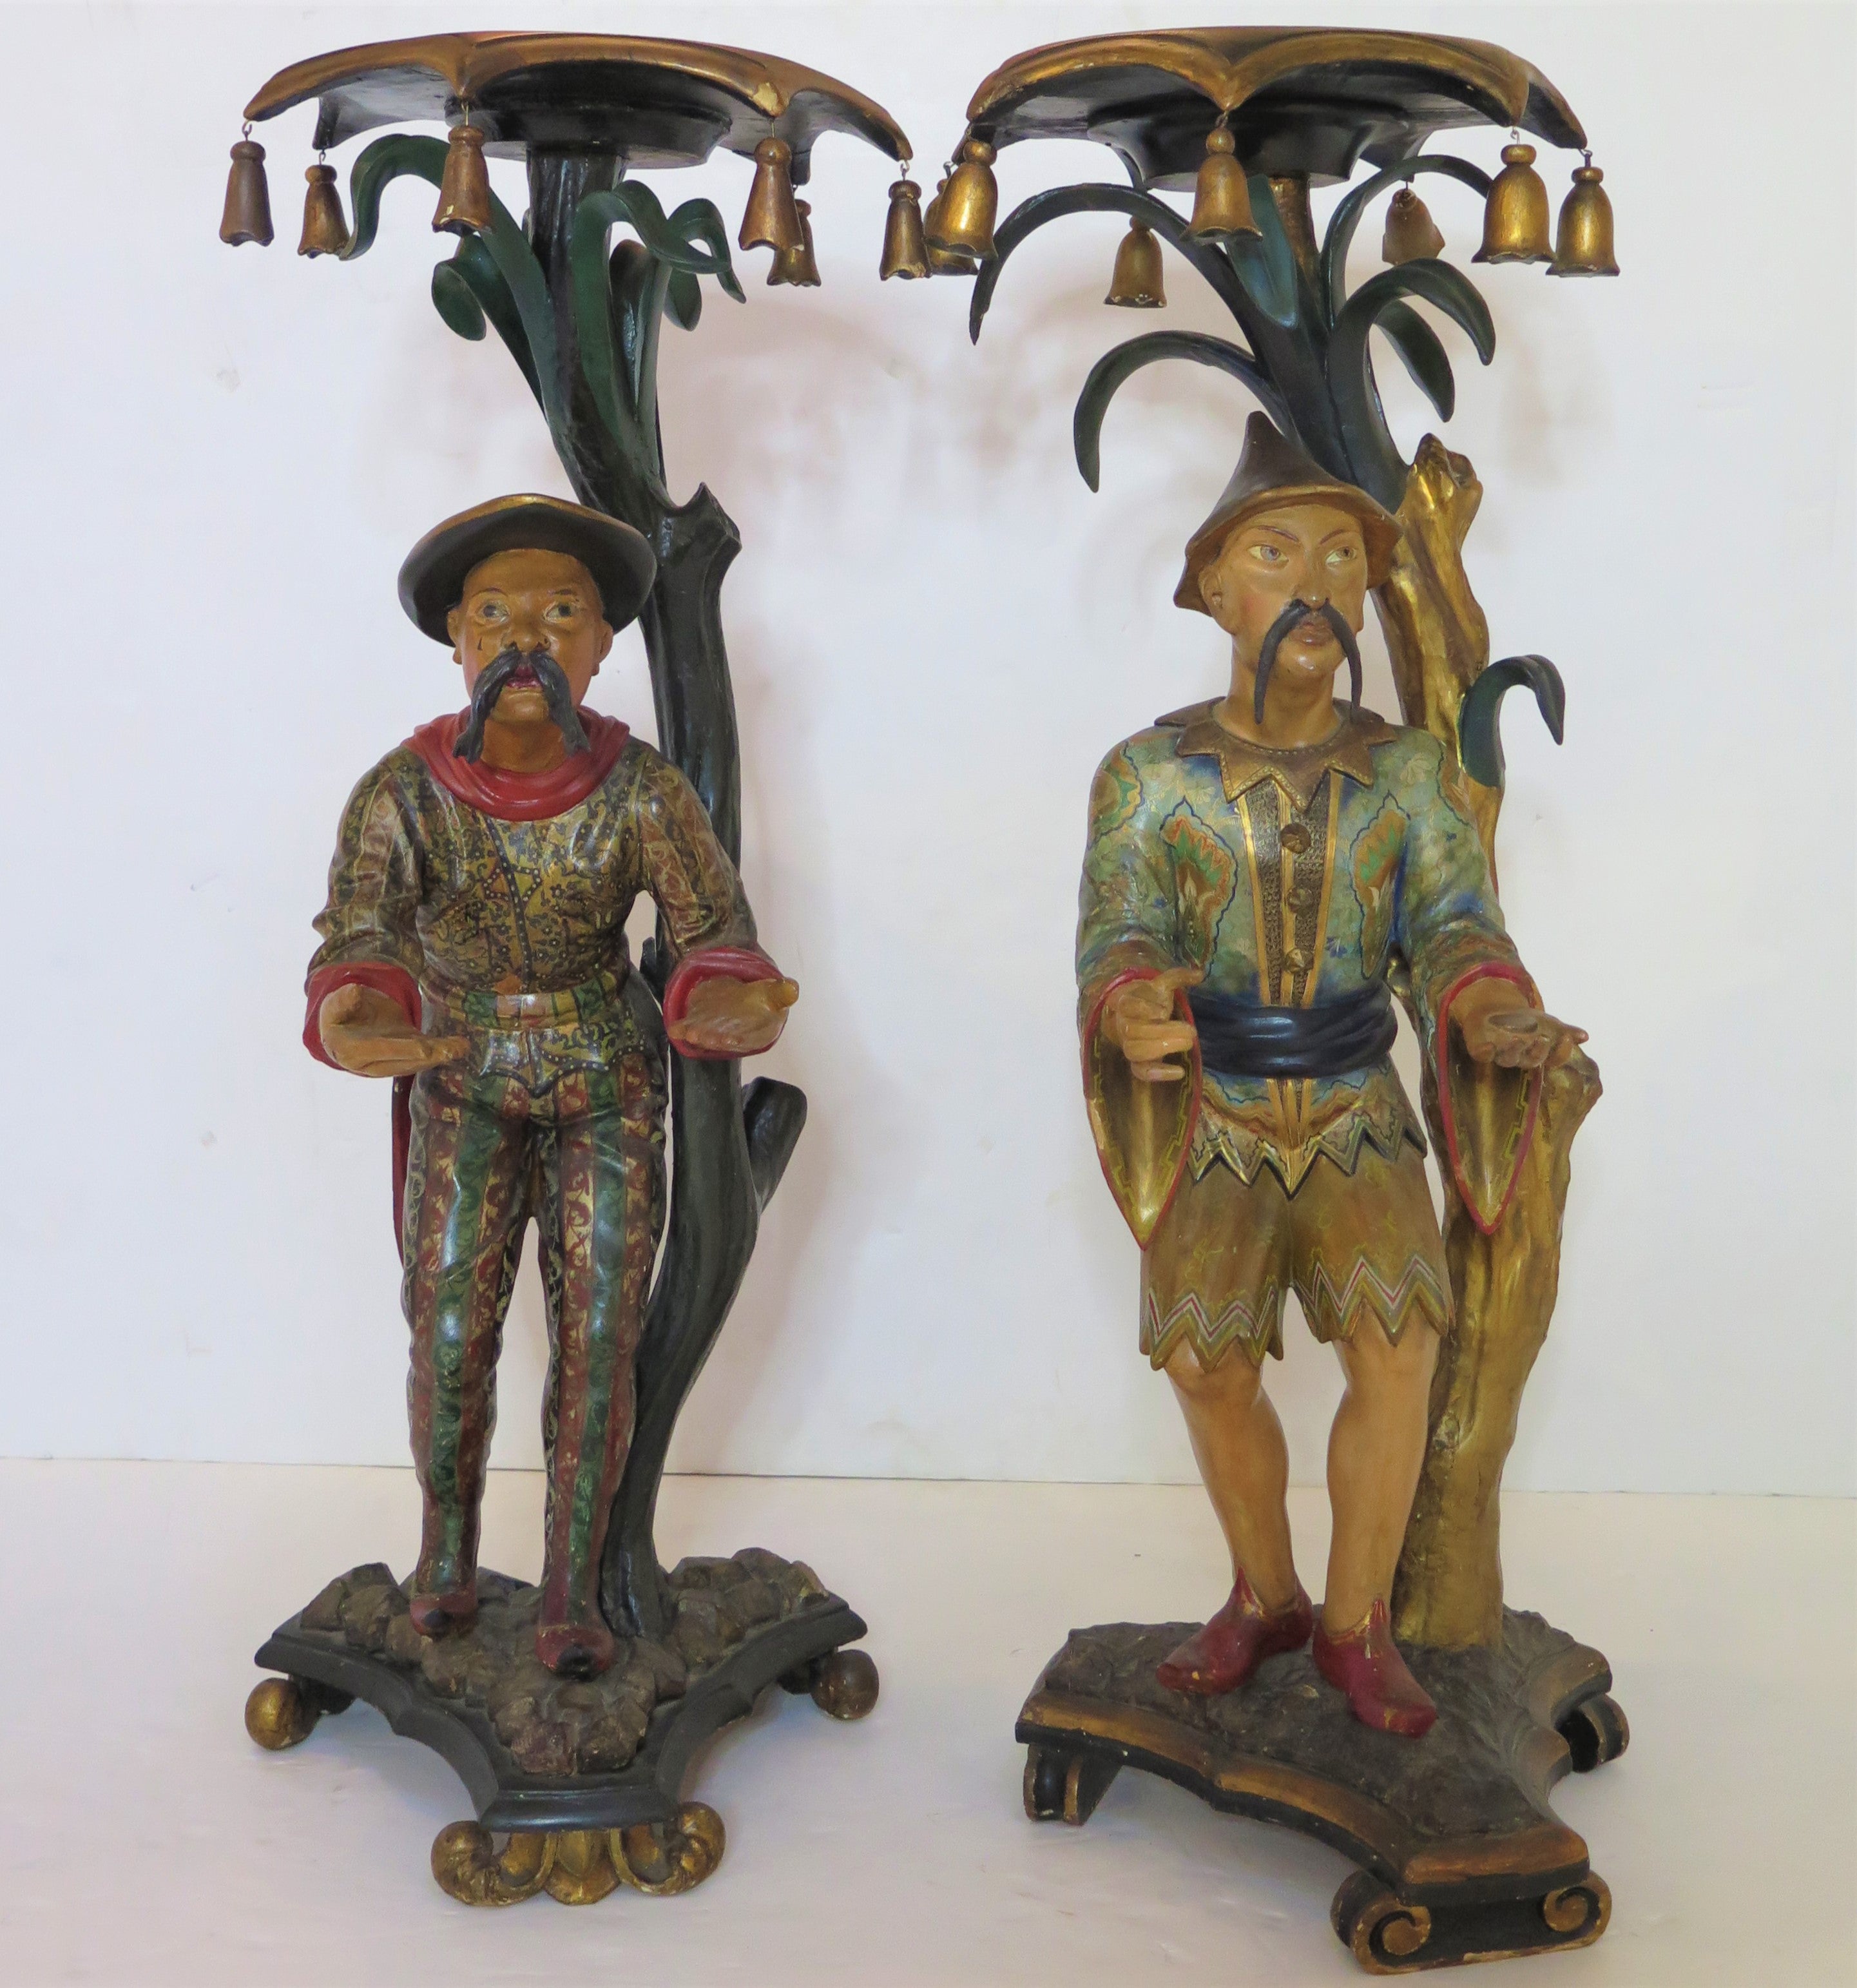 Pair of Elaborately Carved and Polychromed Venetian Chinamen Stands